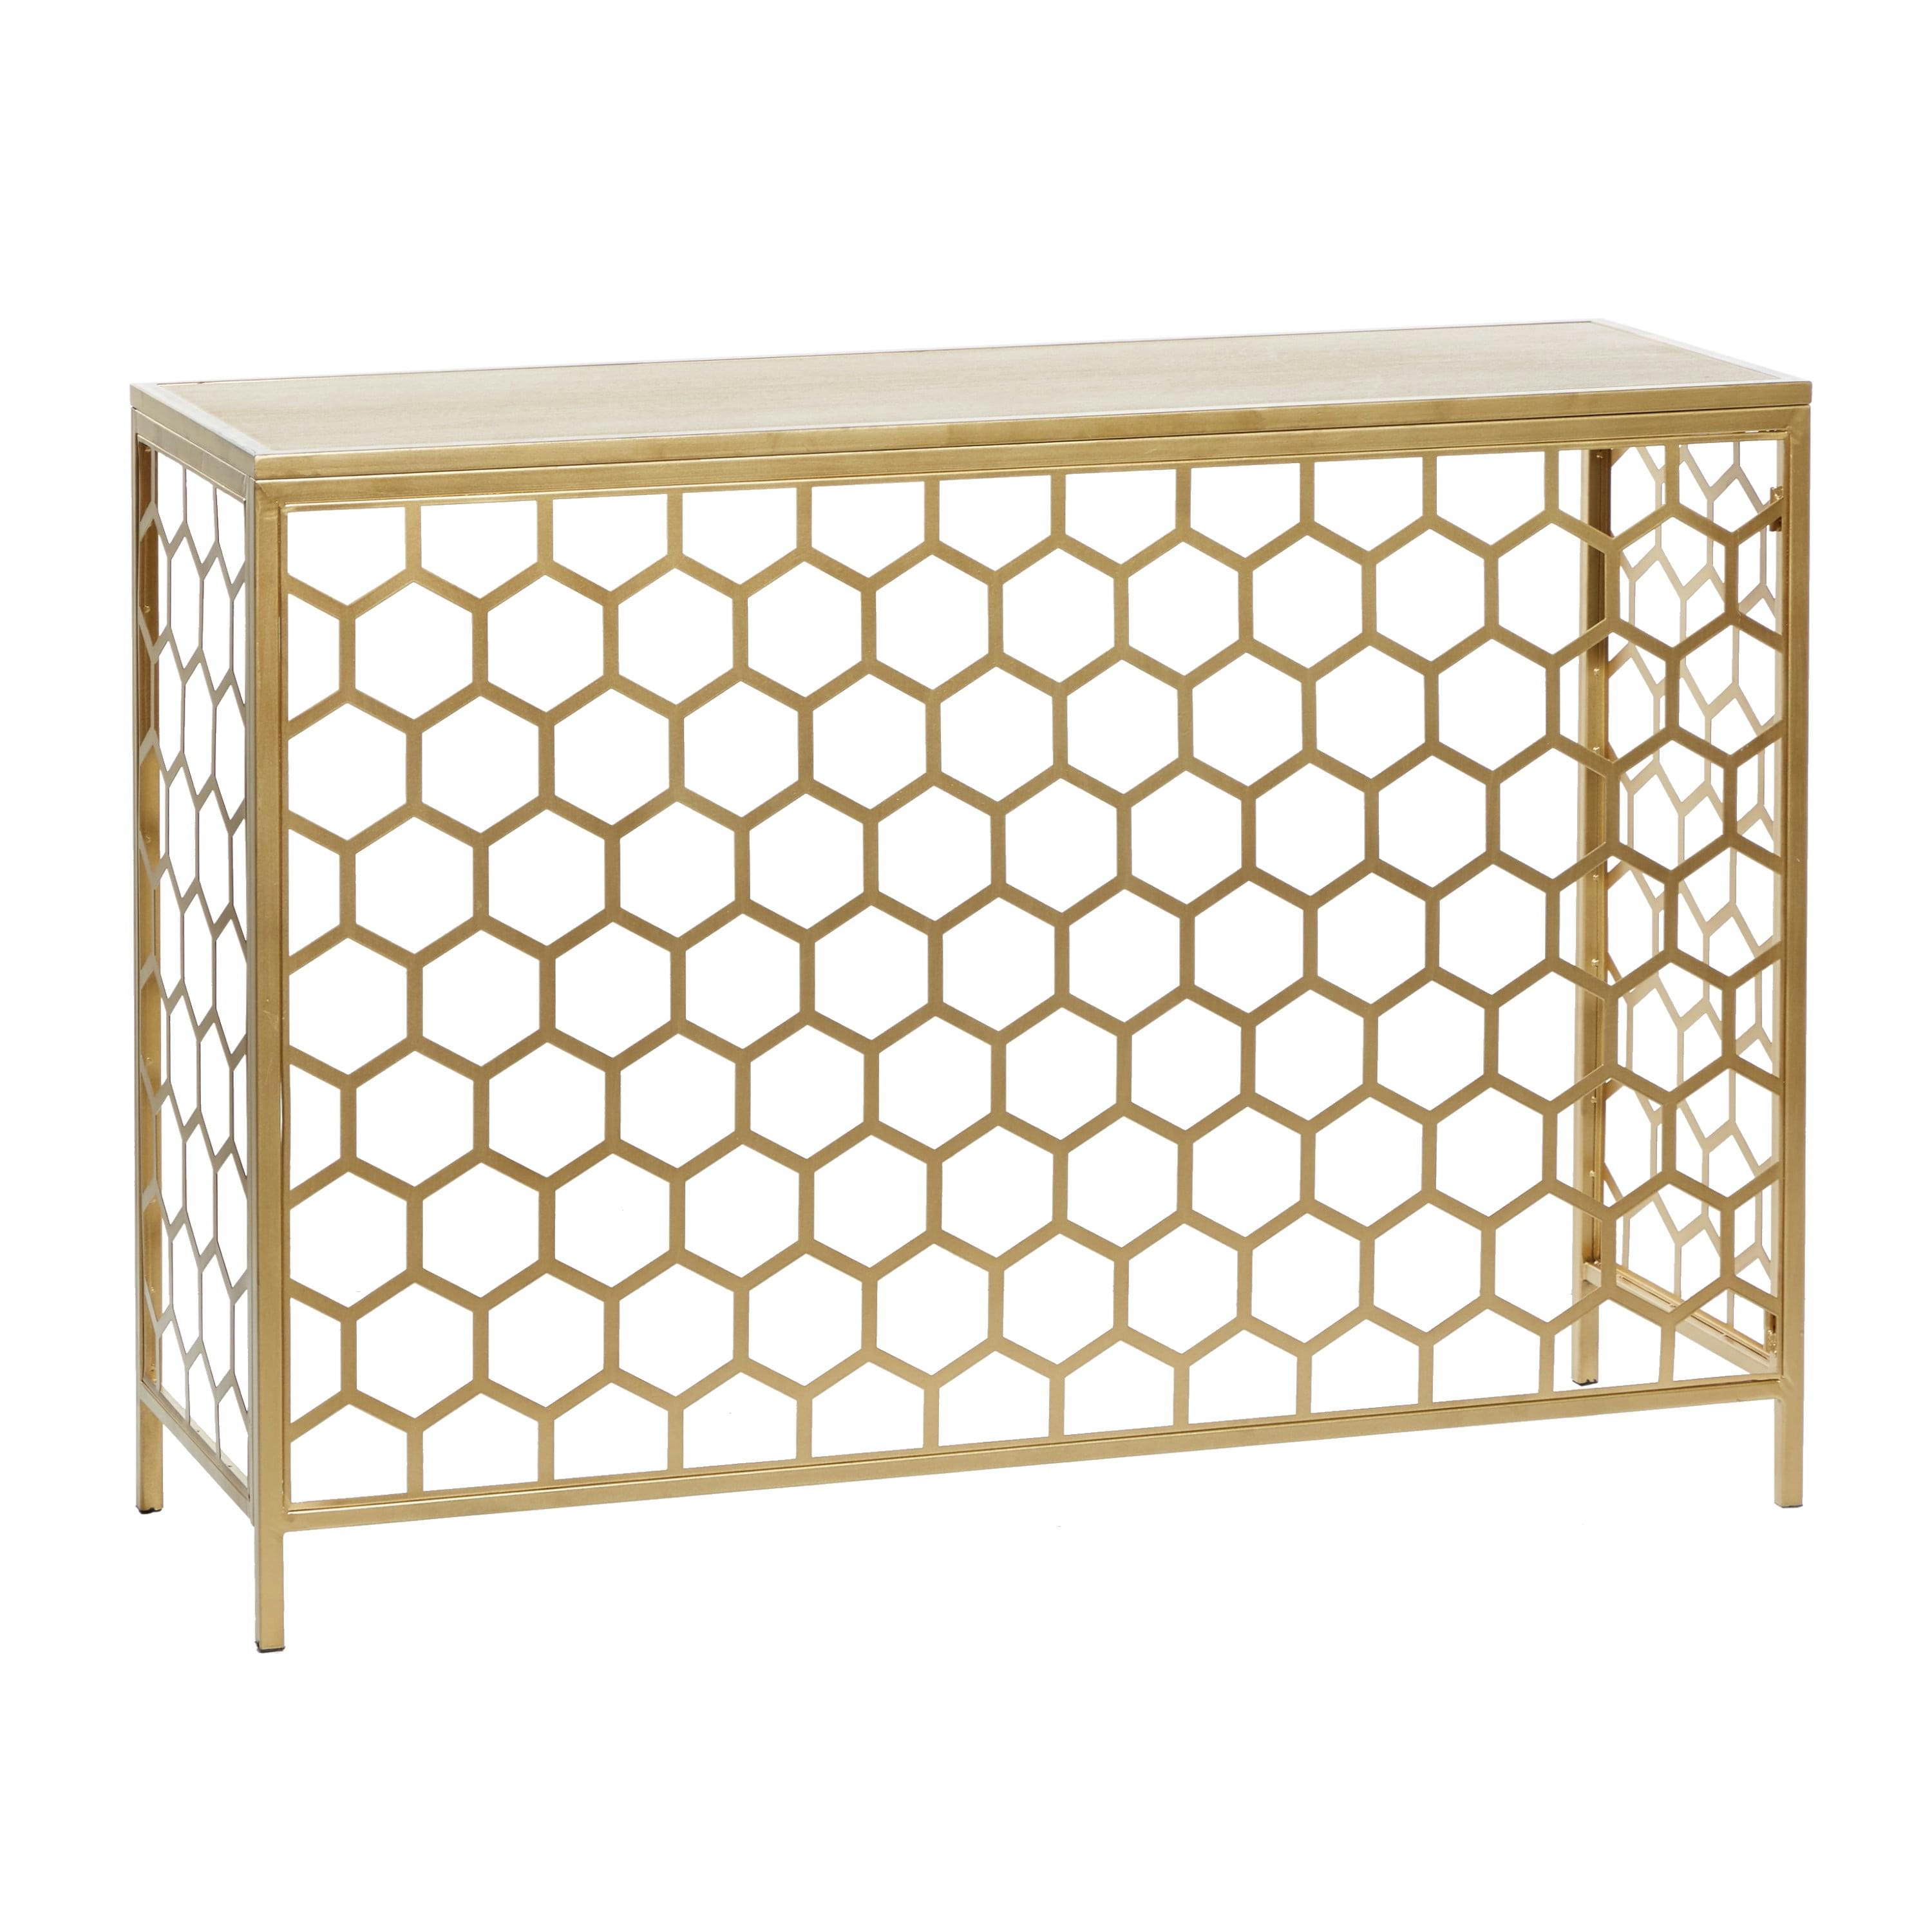 Elegant Gold Metal and Brown Wood Console Table with Honeycomb Pattern, 42"